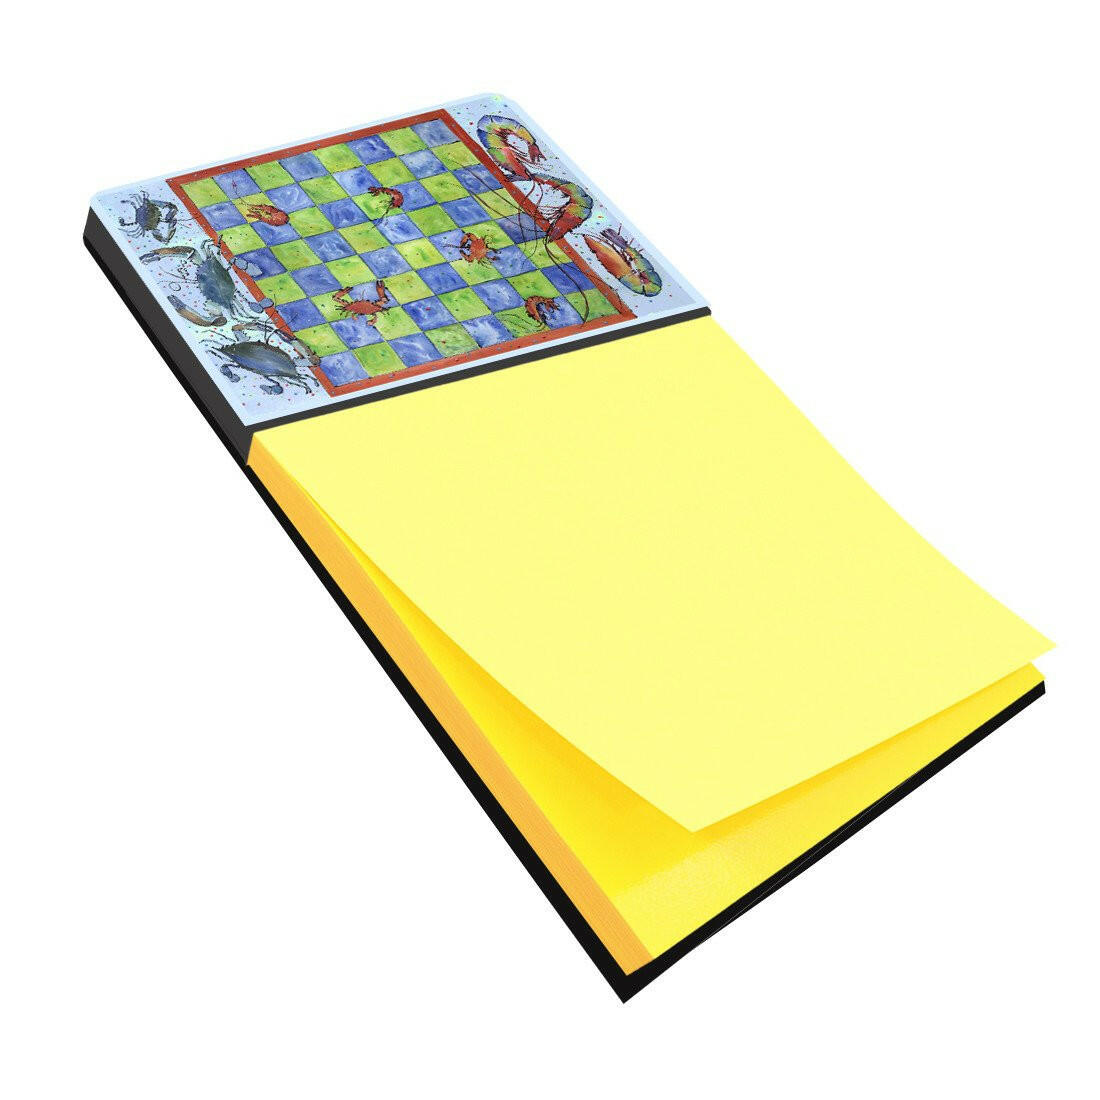 Crab and Shrimp Checkerboard Refiillable Sticky Note Holder or Postit Note Dispenser 8196SN by Caroline's Treasures